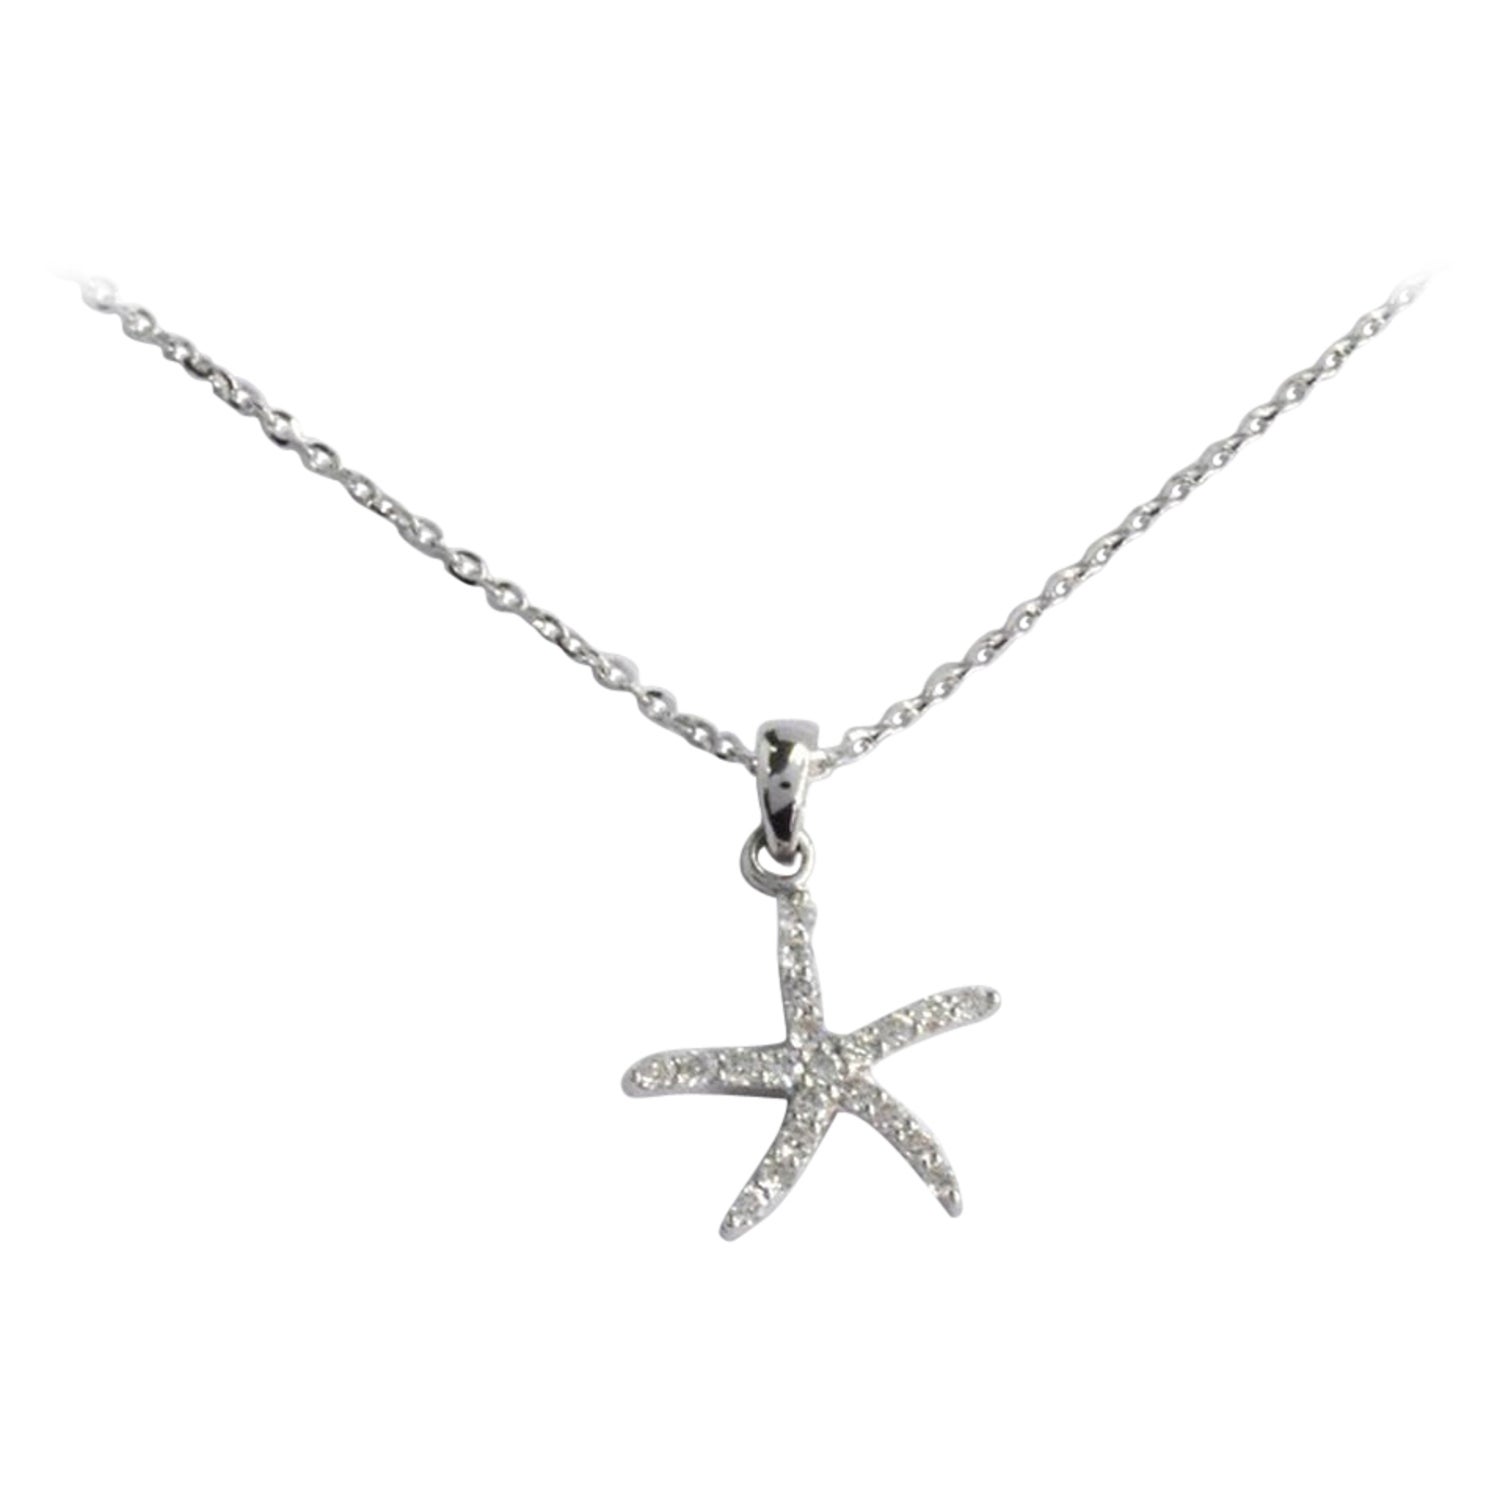 925 Sterling Silver Starfish Pendant Necklace Design 4 45cm / 18 inch